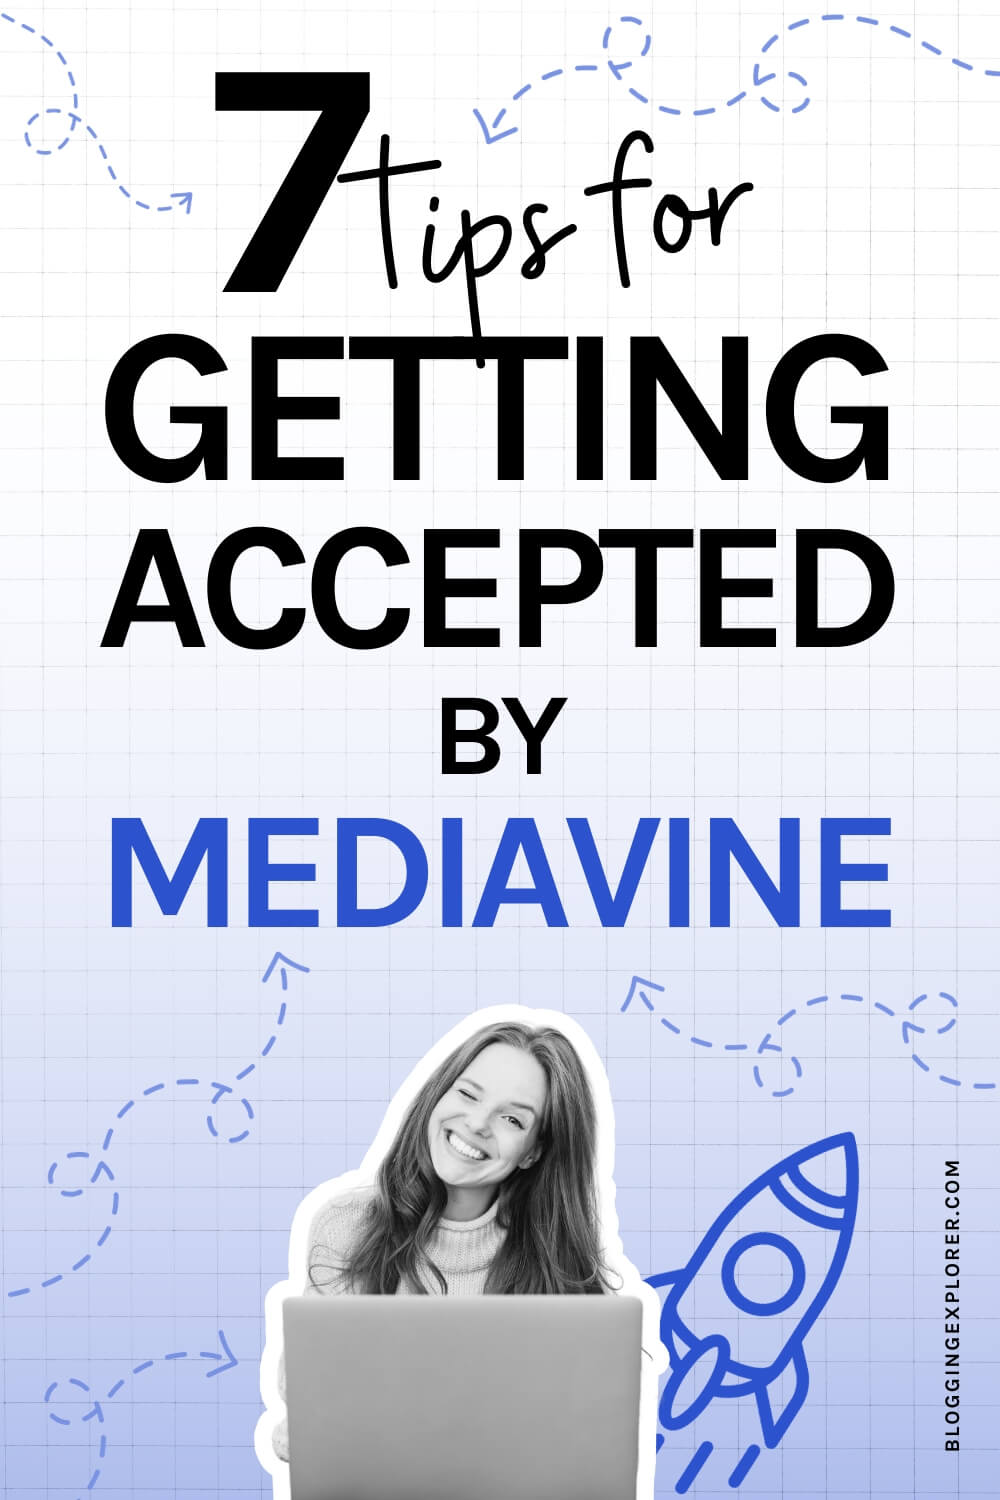 Tips for getting accepted by Mediavine